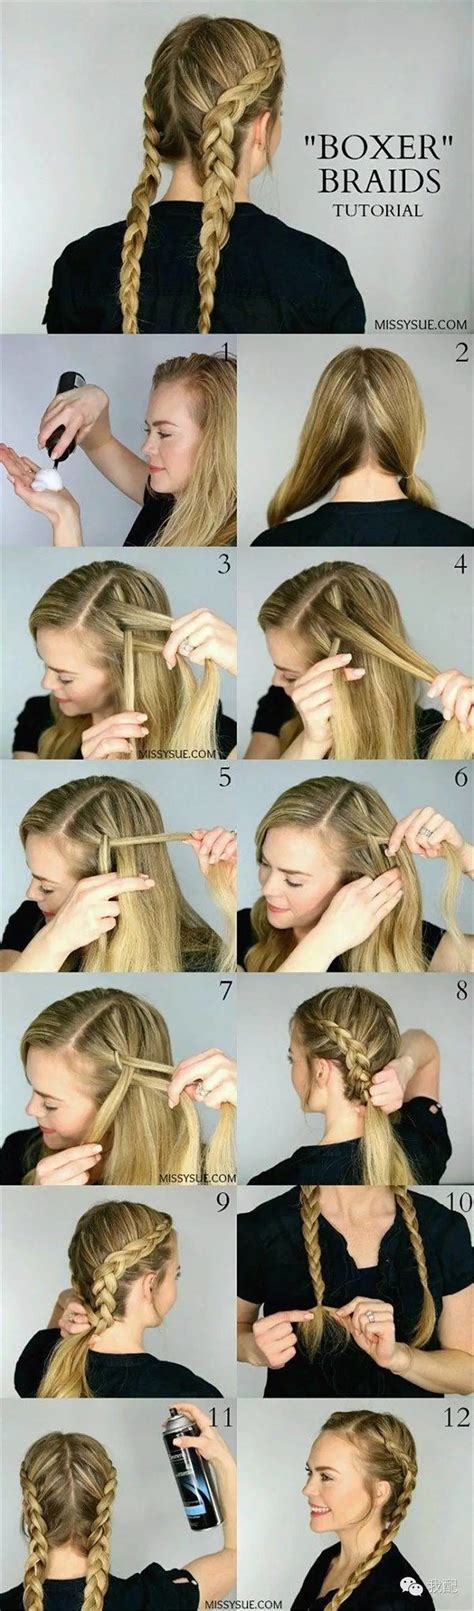 Dutch braid tutorial - Side Dutch braid hair tutorial. 1 . 1 Apply volumising spray. Start your side Dutch braid by brushing your hair through to get rid of any tangles. Then, if you have fine hair or soft, just-washed hair, apply a volumising product like the TIGI Bed Head Superstar Queen For A Day Thickening Spray to give your braid more texture. 2 . 2